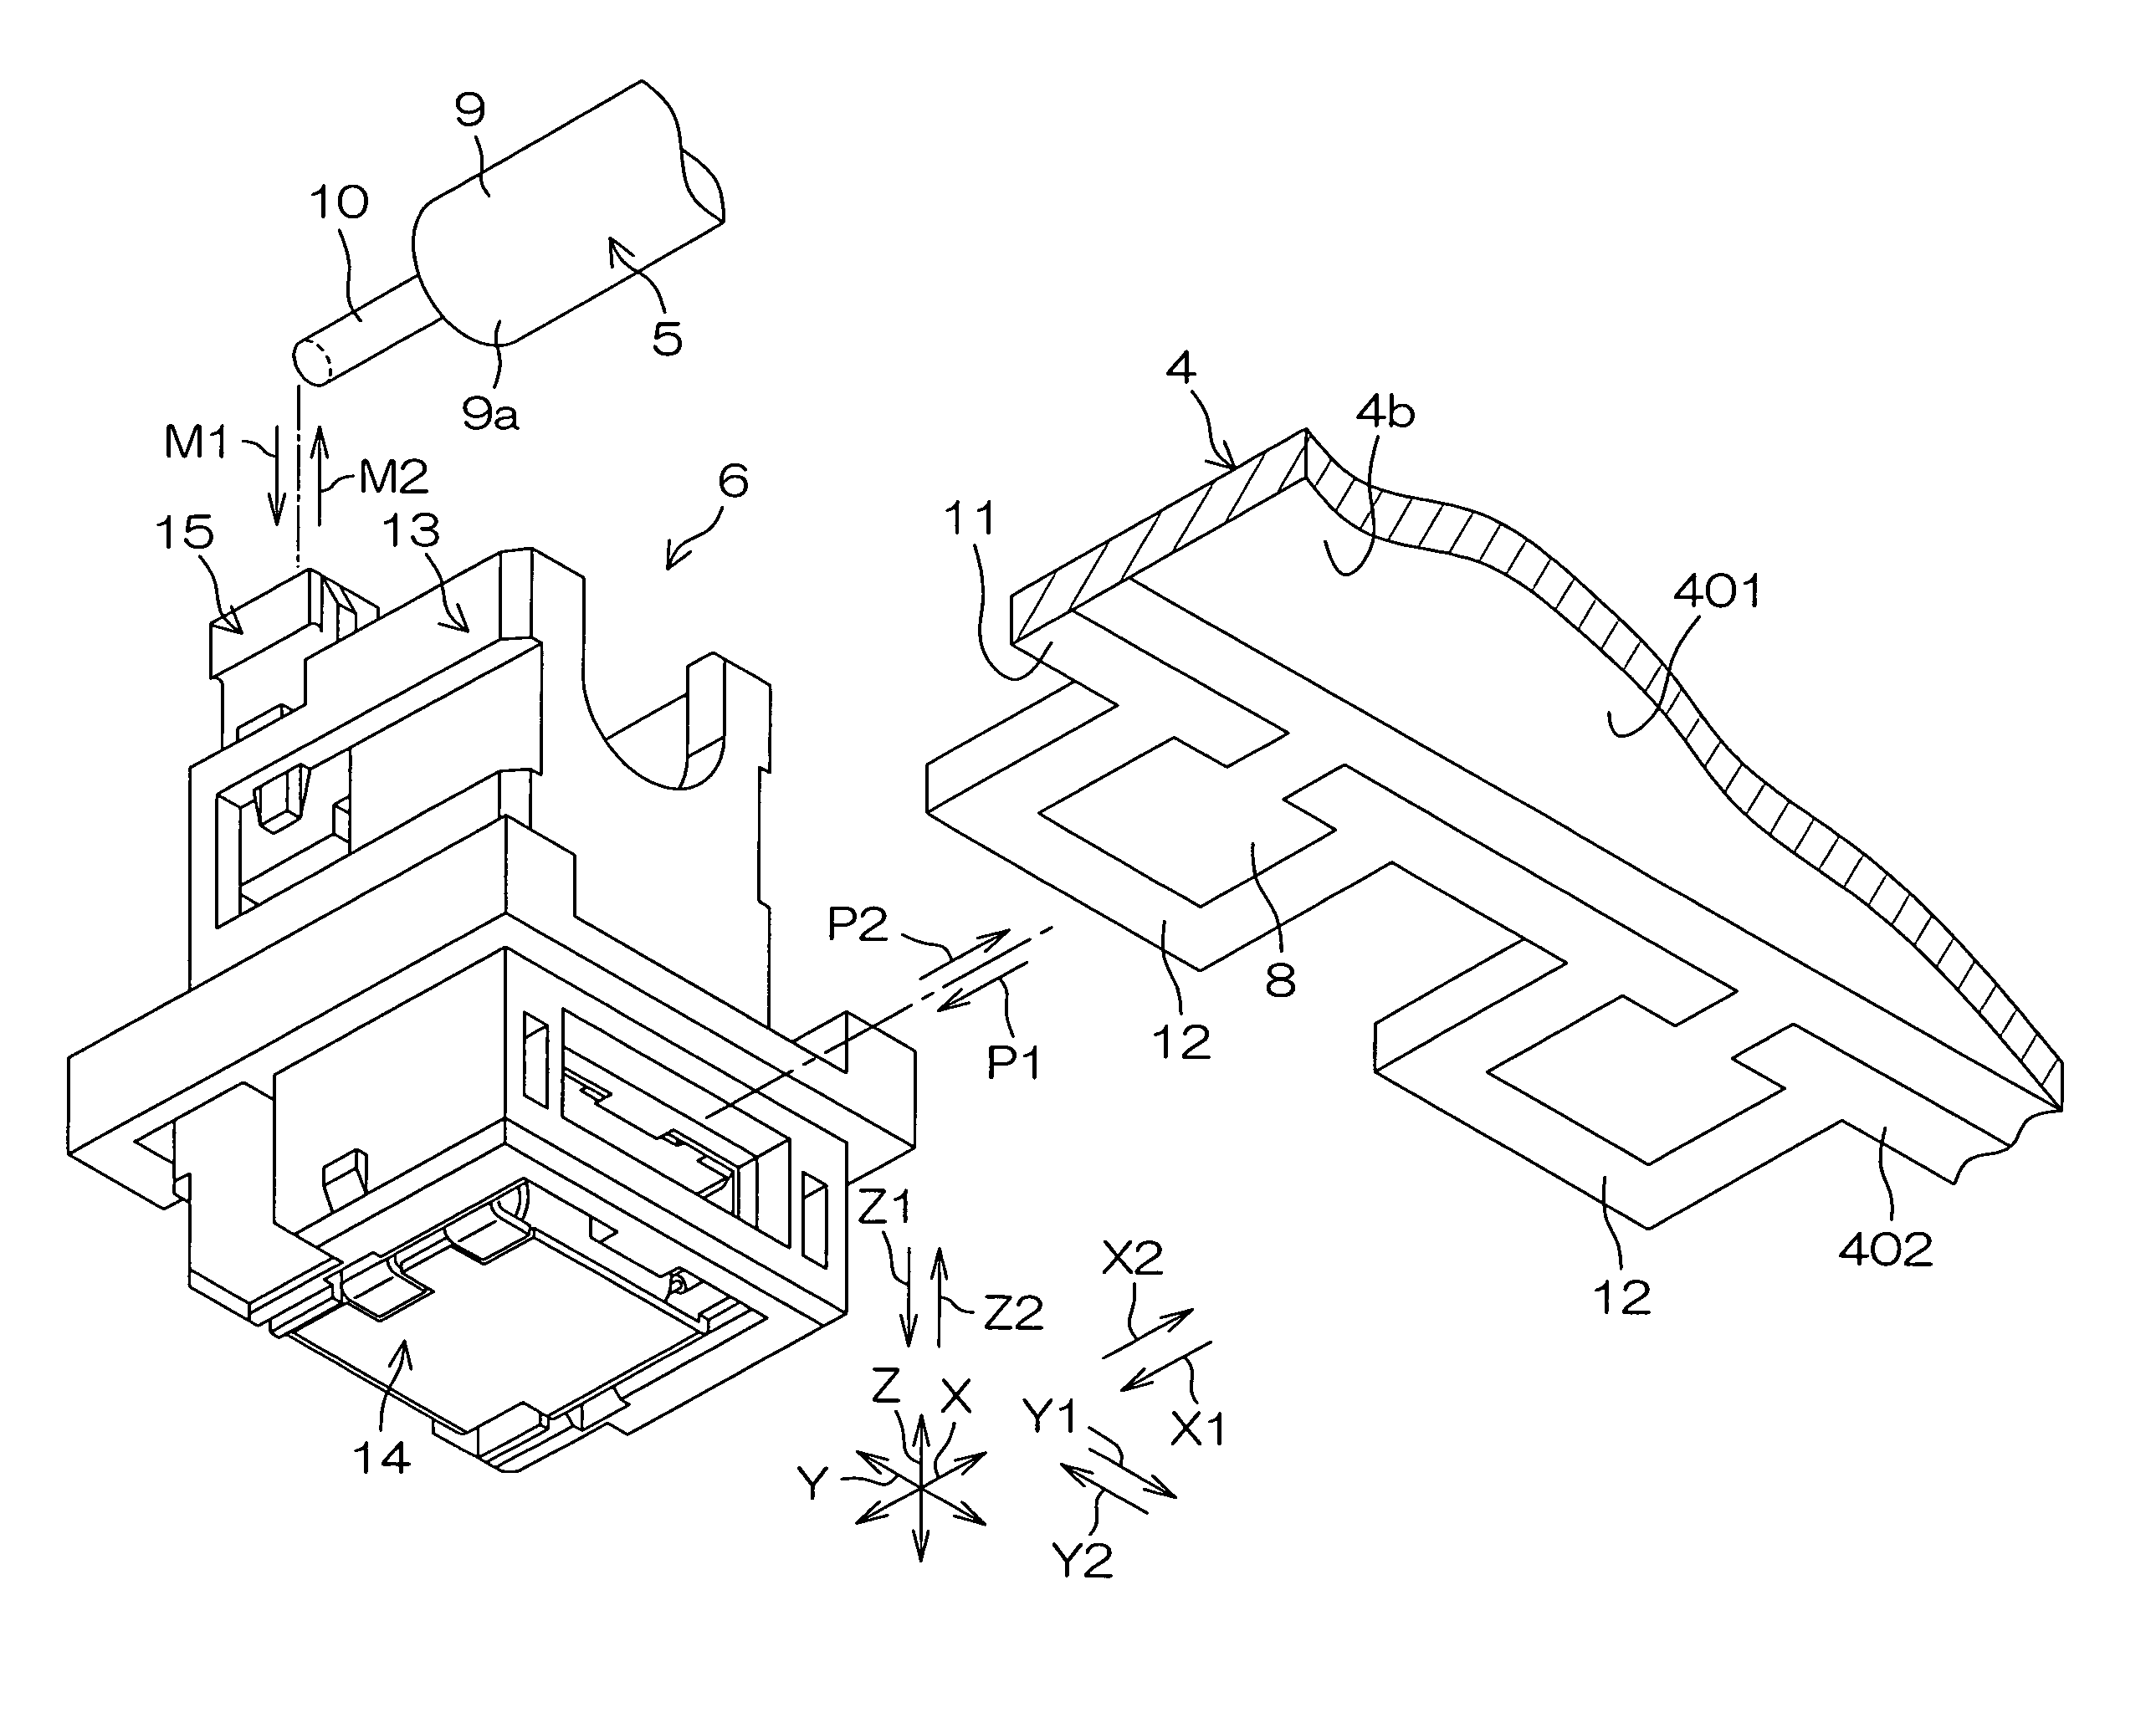 Electric connector for interconnecting at least one fluorescent lamp and a circuit board and connection structure for same